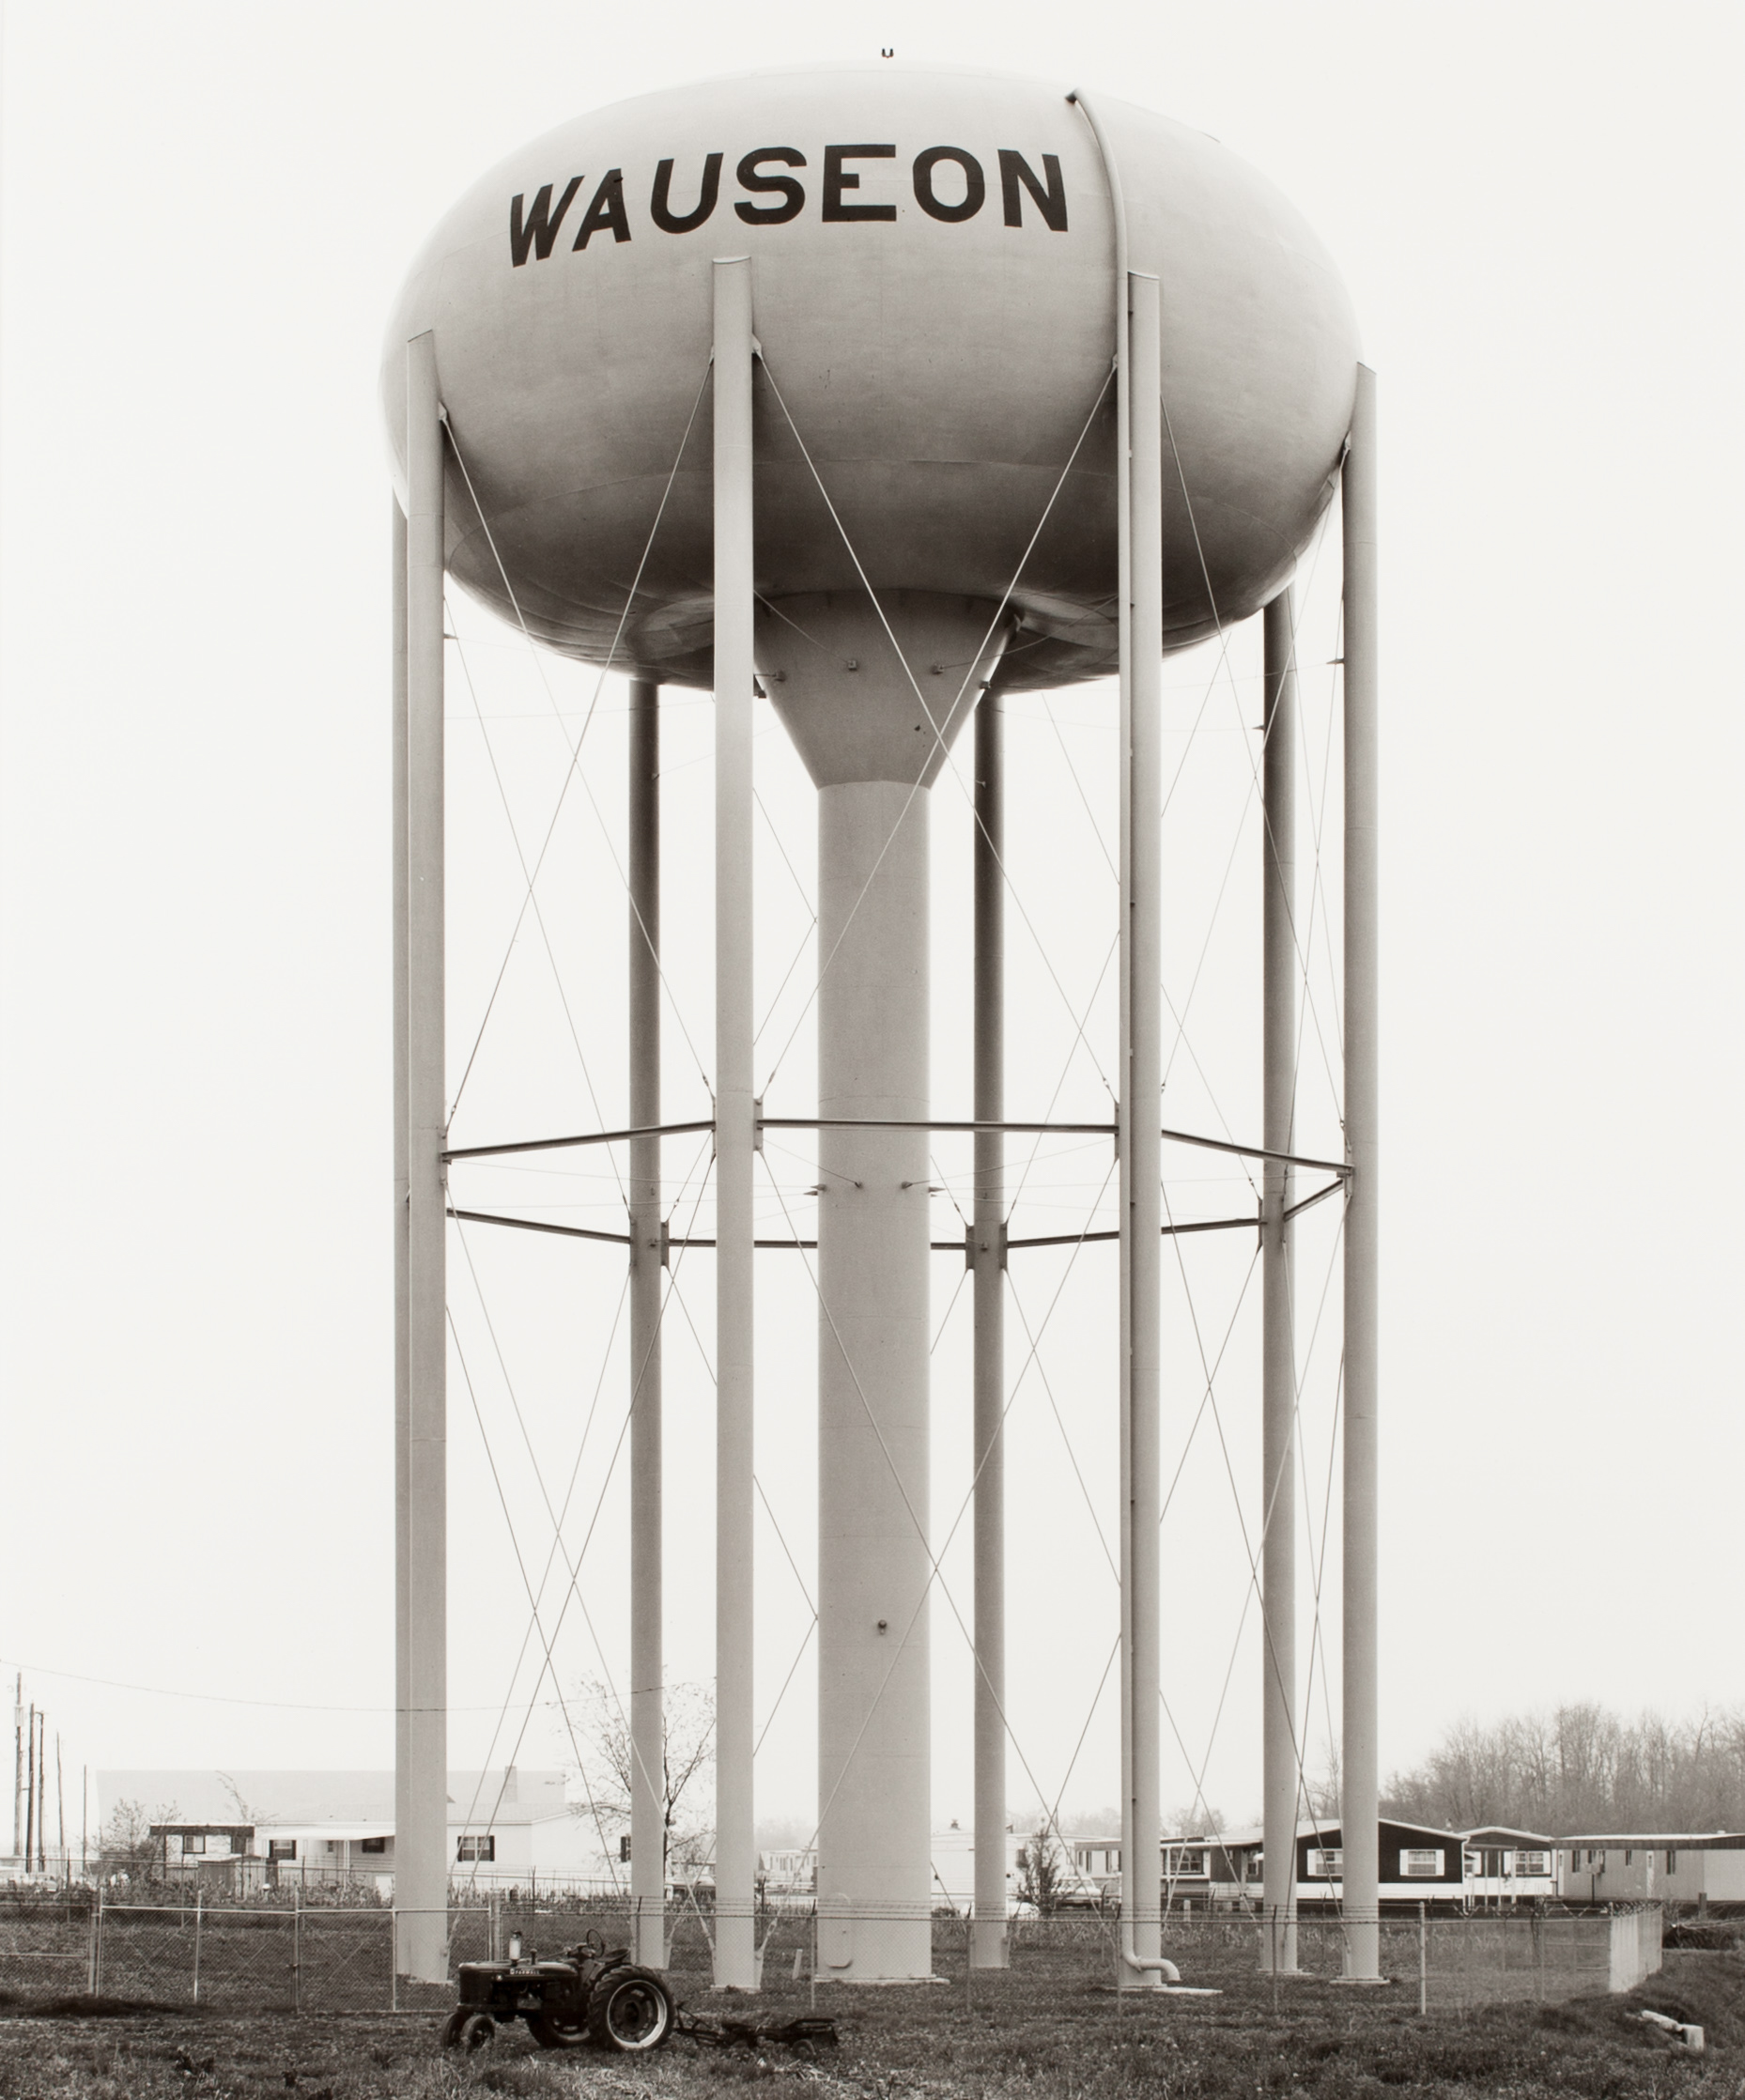 Black and white photograph of a water tower amongst residential homes